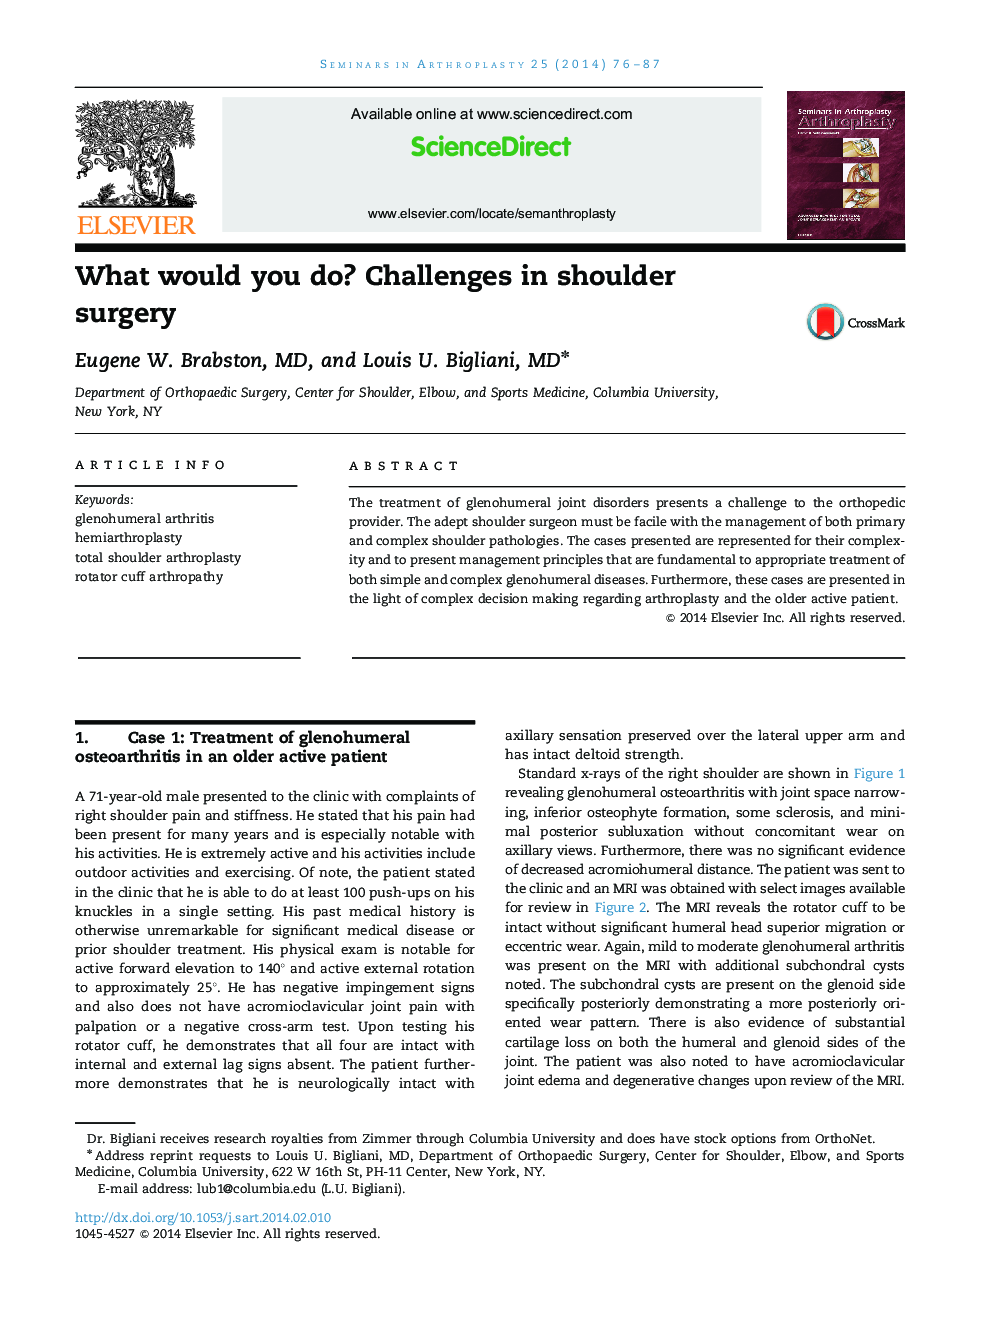 What would you do? Challenges in shoulder surgery 